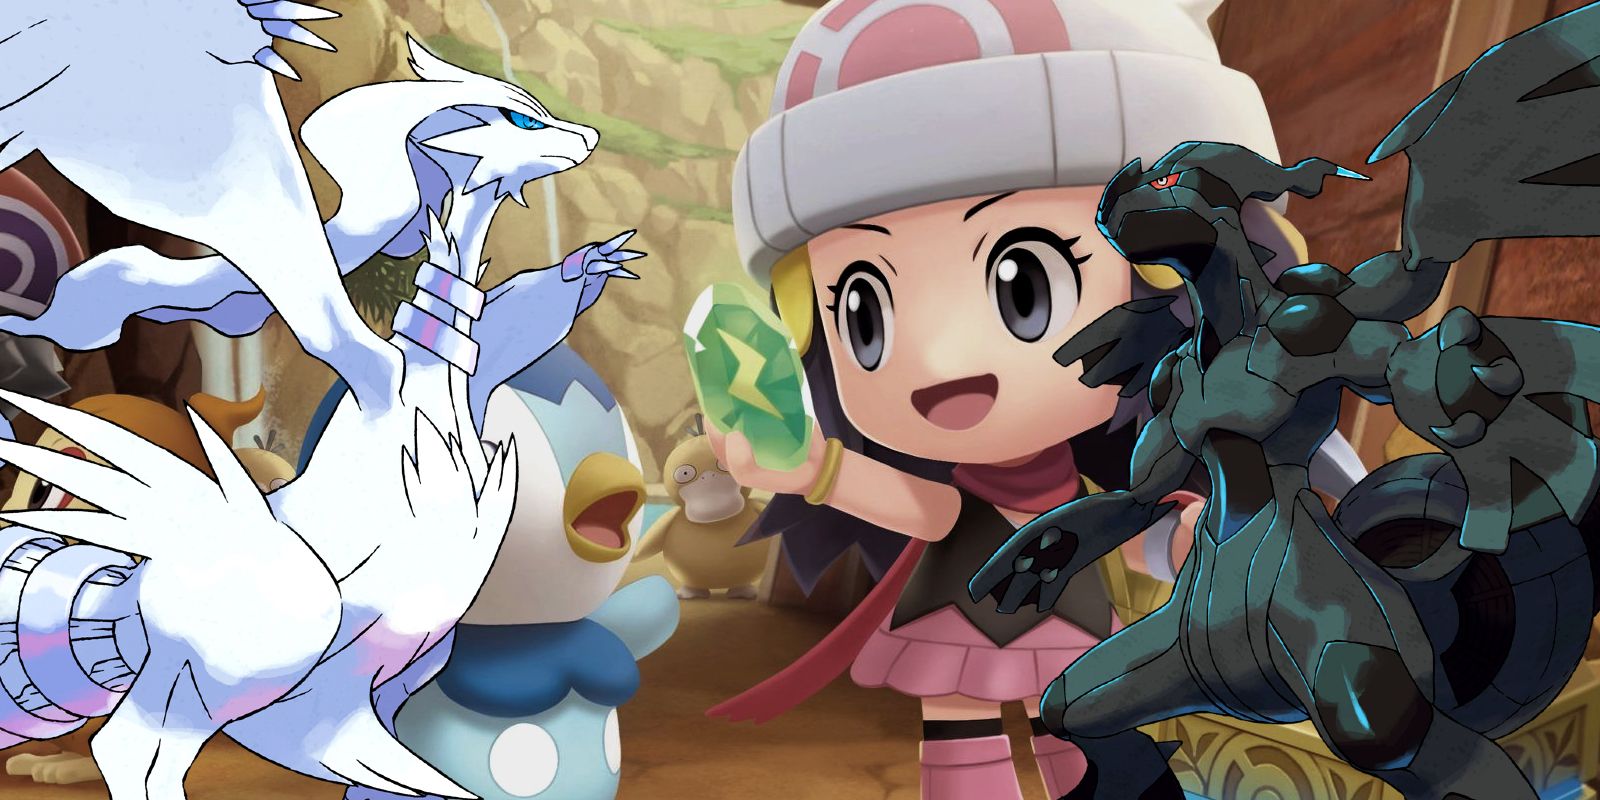 Pokémon Black and White's Legendaries Reshiram and Zekrom overlaid on either side of an artwork depicting Dawn and Piplup from BDSP in the Grand Underground.